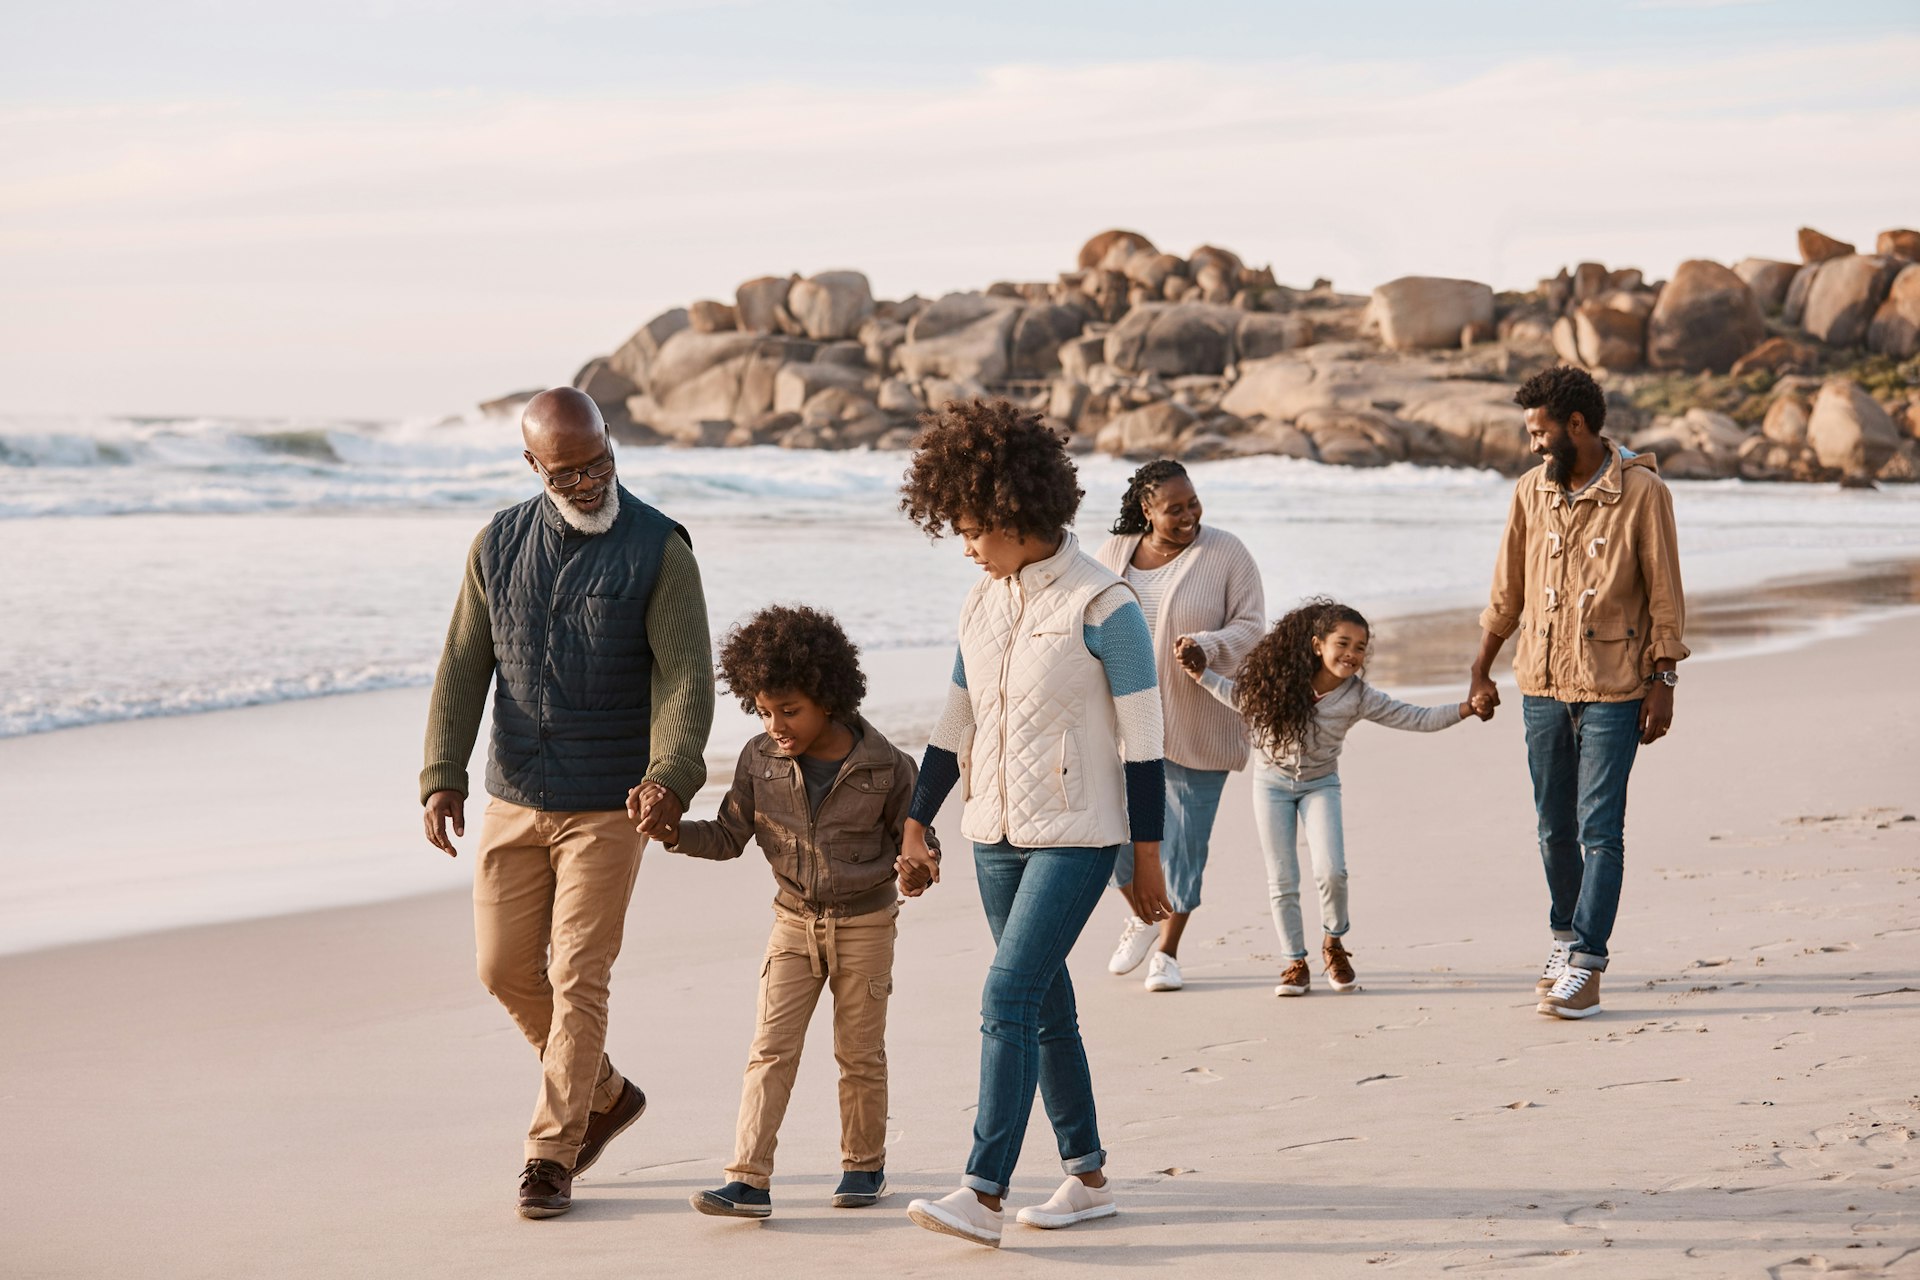 A multigenerational family stroll along a beach together